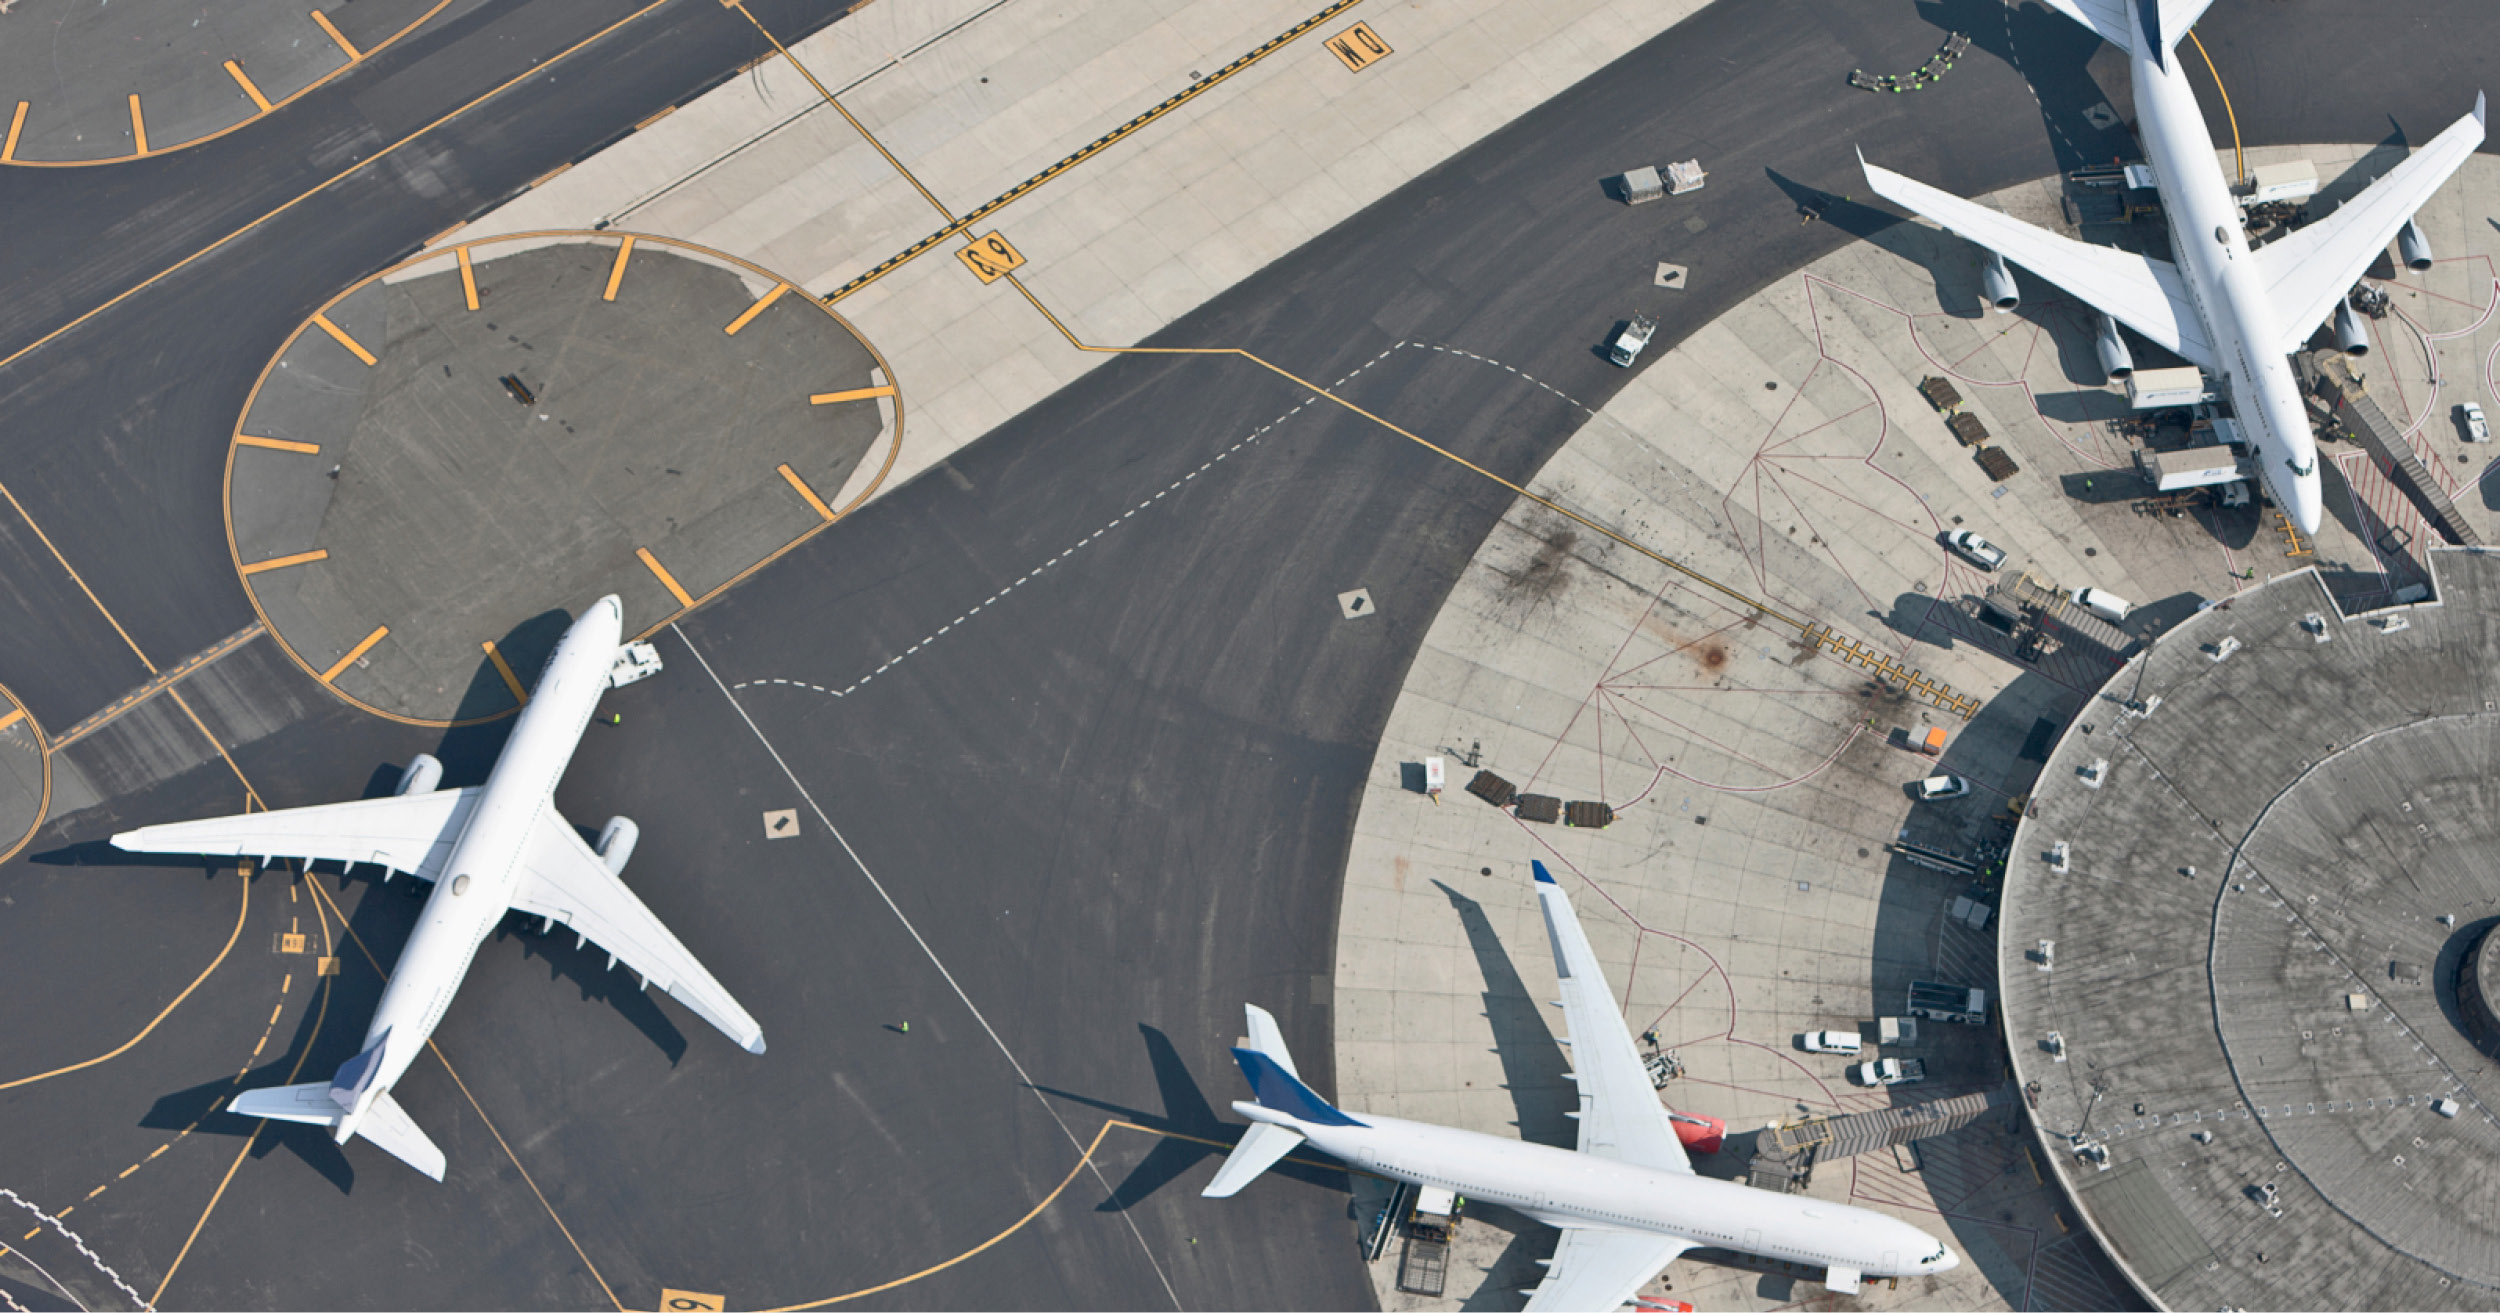 Overhead shot of two planes parked at airport gates and one plane taxiing